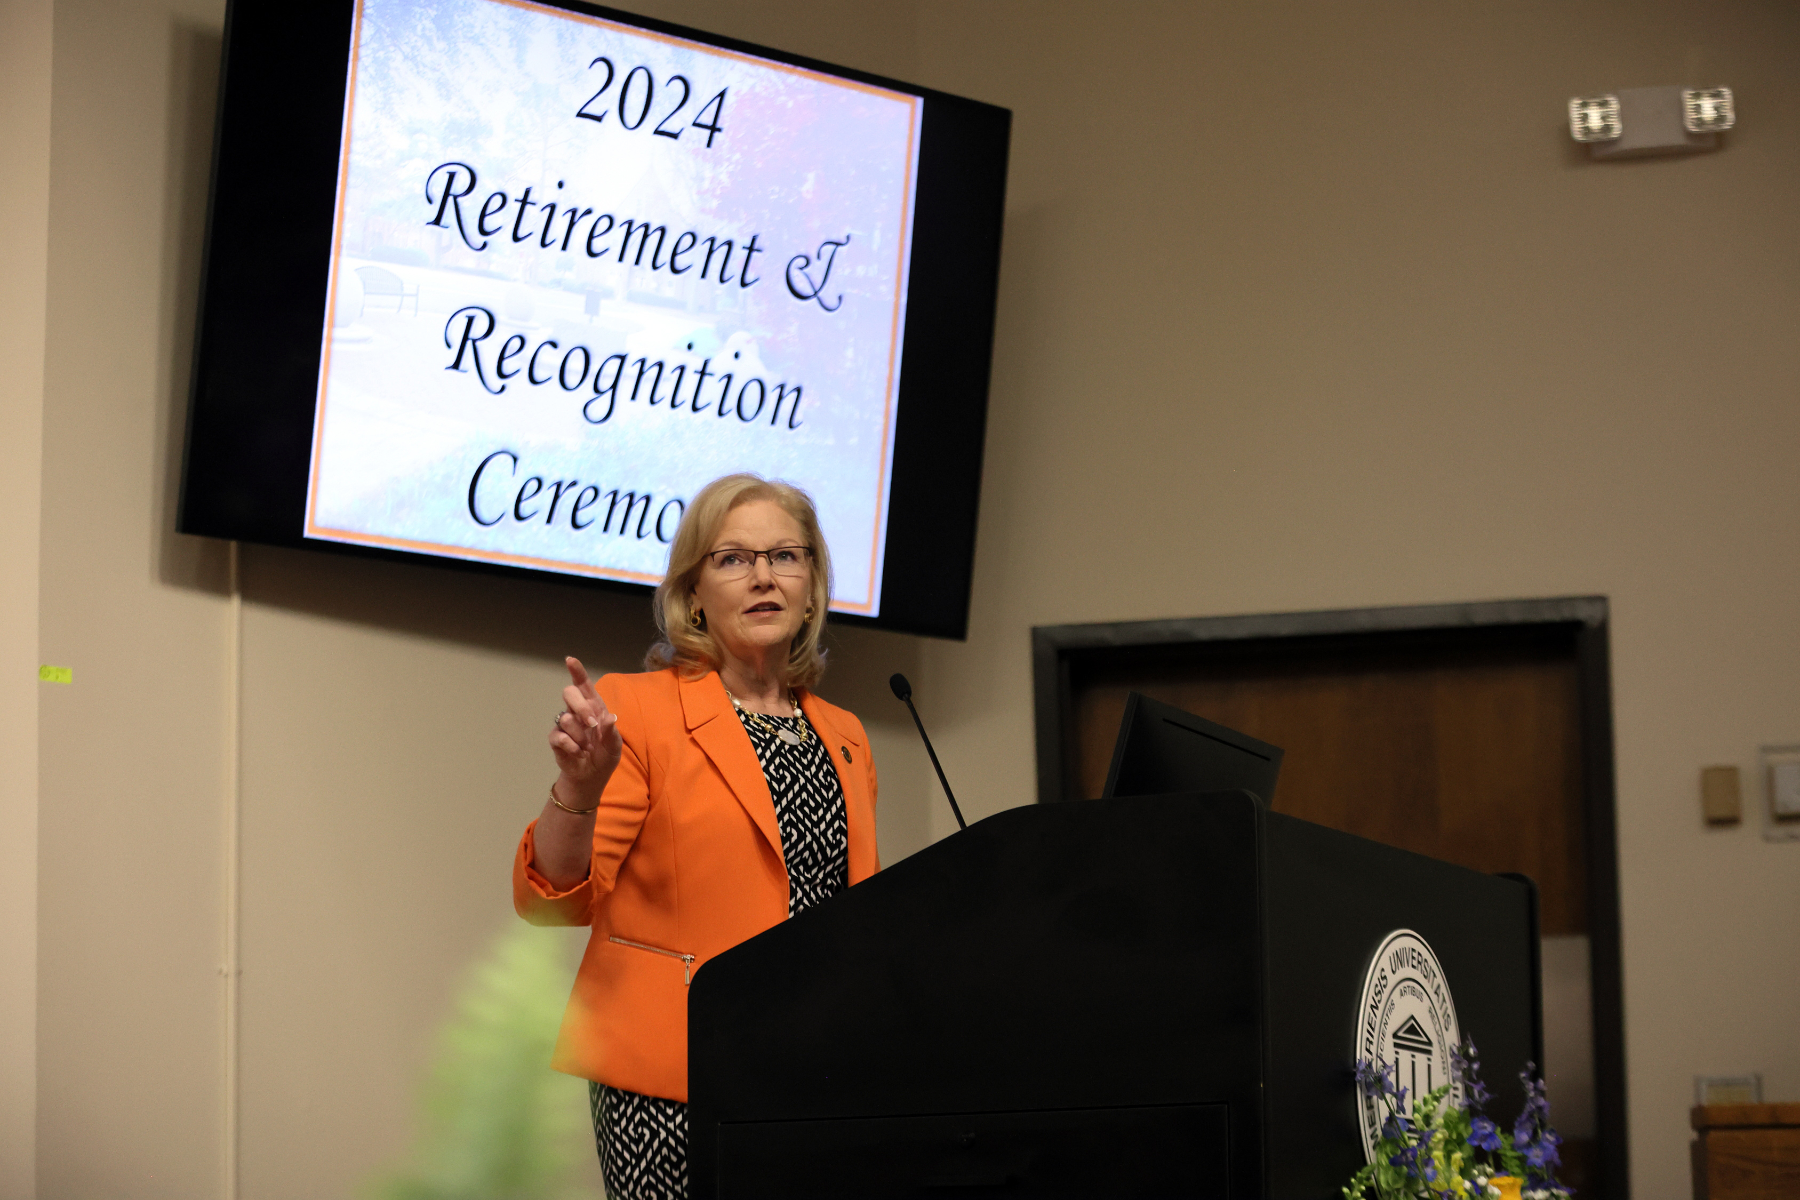 a woman wearing an orange blazer standing behind a podium talking and gesturing. The words "2024 Retirement and Recognition Ceremony" are shown a TV screen behind her.